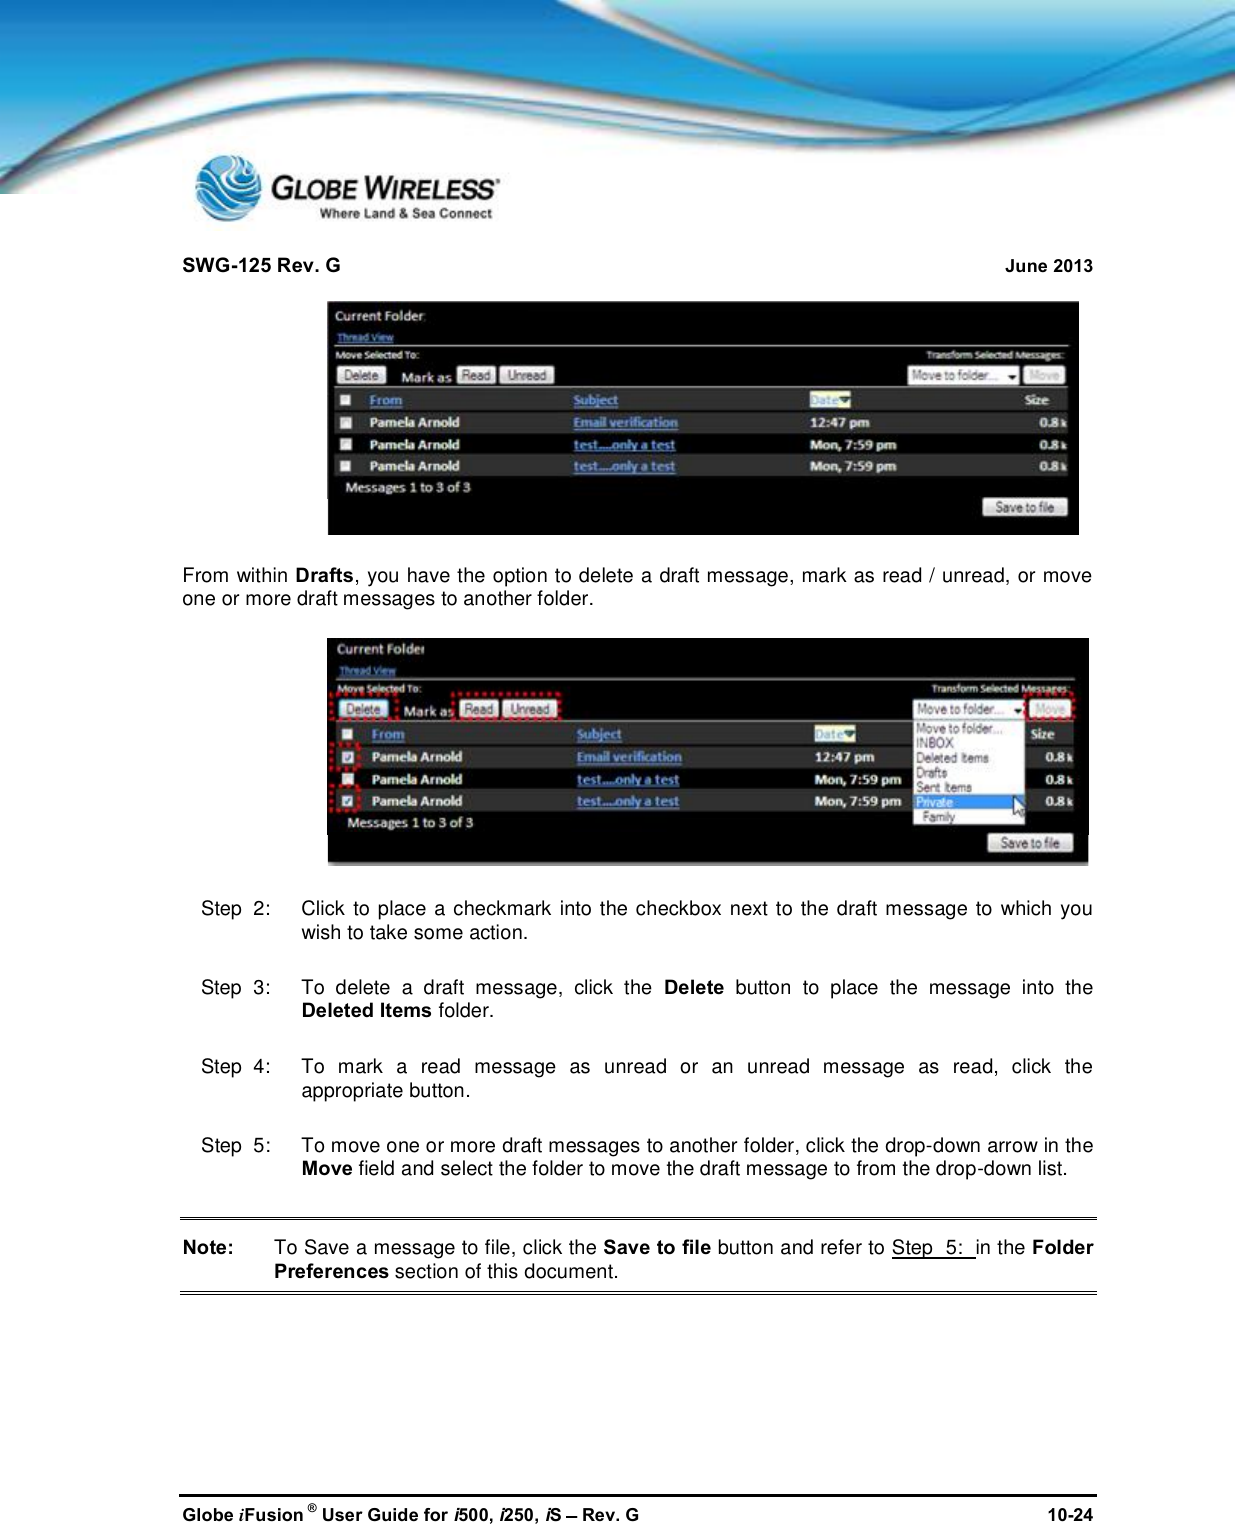 SWG-125 Rev. G June 2013Globe iFusion ®User Guide for i500, i250, iSRev. G 10-24From within Drafts, you have the option to delete a draft message, mark as read / unread, or moveone or more draft messages to another folder.Step  2:   Click to place a checkmark into the checkbox next to the draft message to which youwish to take some action.Step  3:   To delete a draft message, click the Delete button to place the message into theDeleted Items folder.Step  4:   To mark a read message as unread or an unread message as read, click theappropriate button.Step  5:   To move one or more draft messages to another folder, click the drop-down arrow in theMove field and select the folder to move the draft message to from the drop-down list.Note: To Save a message to file, click the Save to file button and refer to Step  5: in the FolderPreferences section of this document.